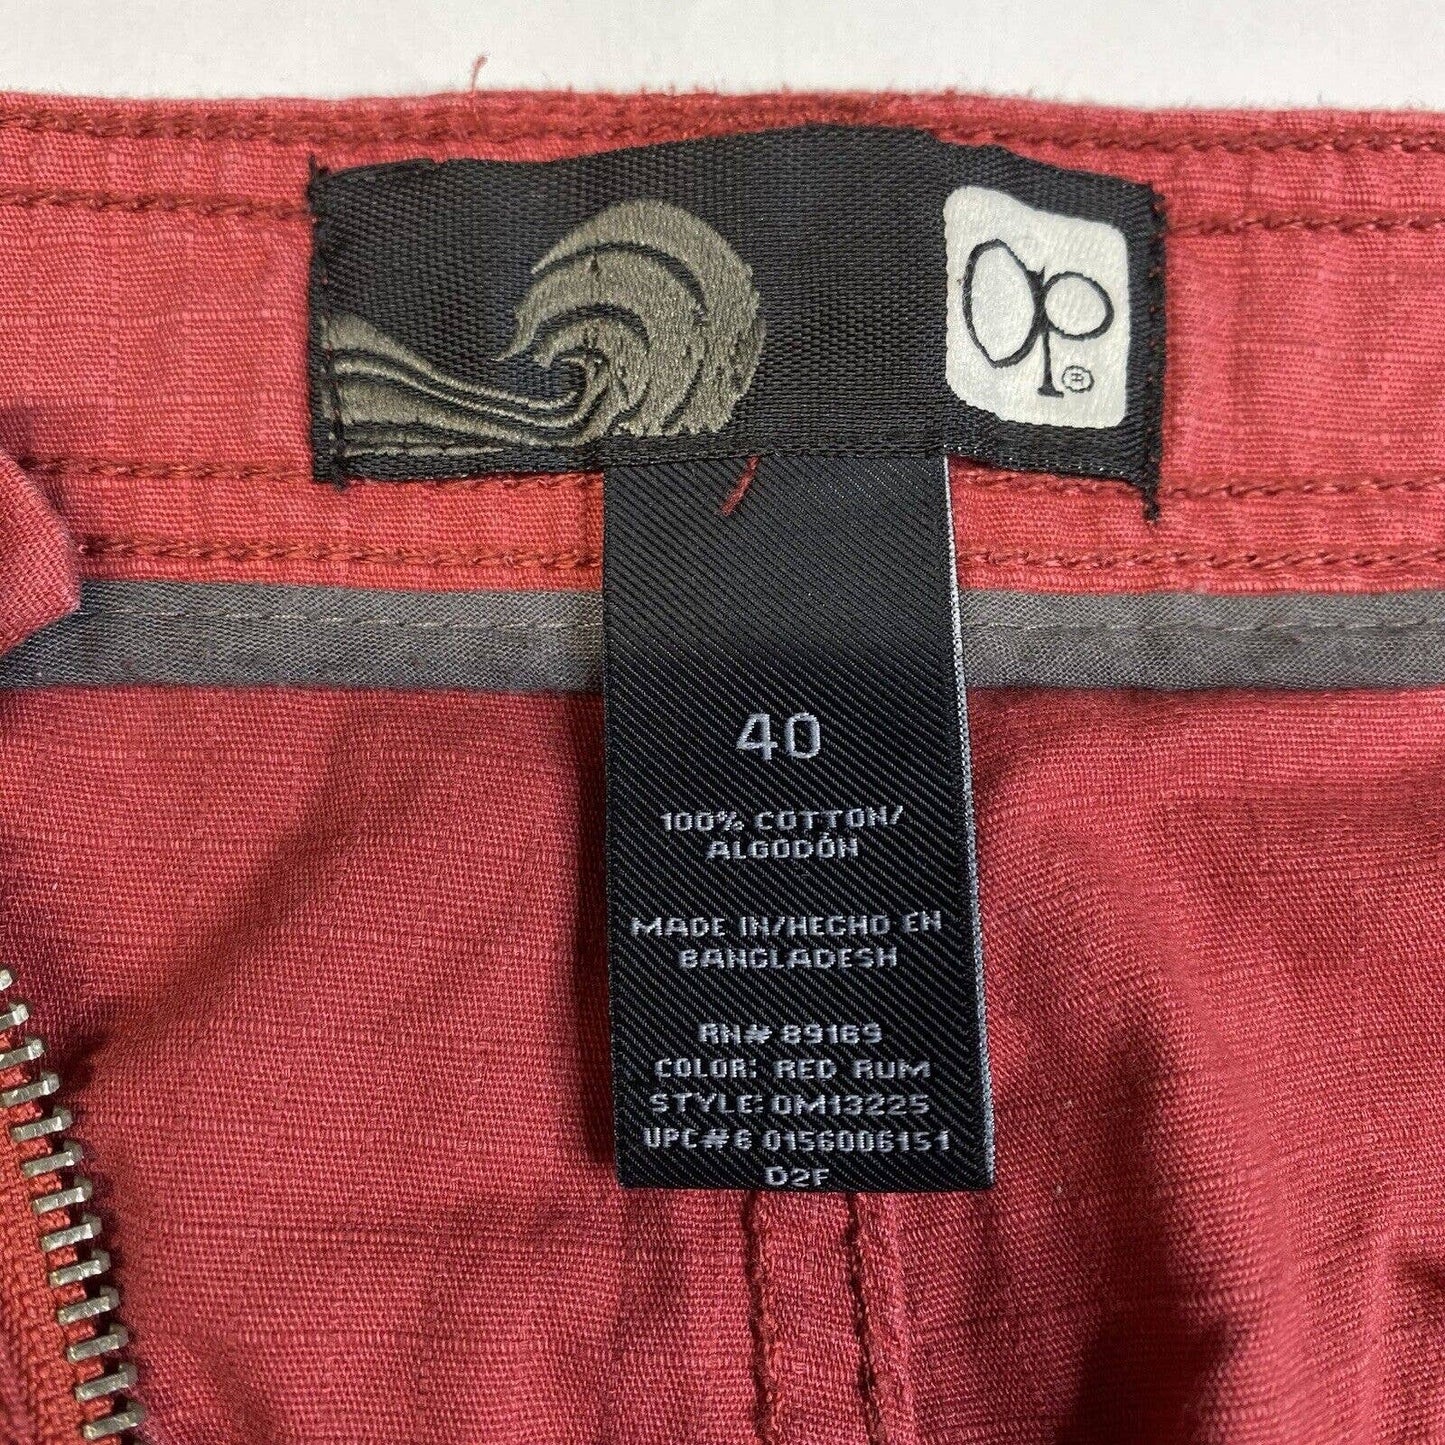 Vintage Ocean Pacific OP Cargo Shorts Mens 40 Red Ripstop Cotton Long Baggy